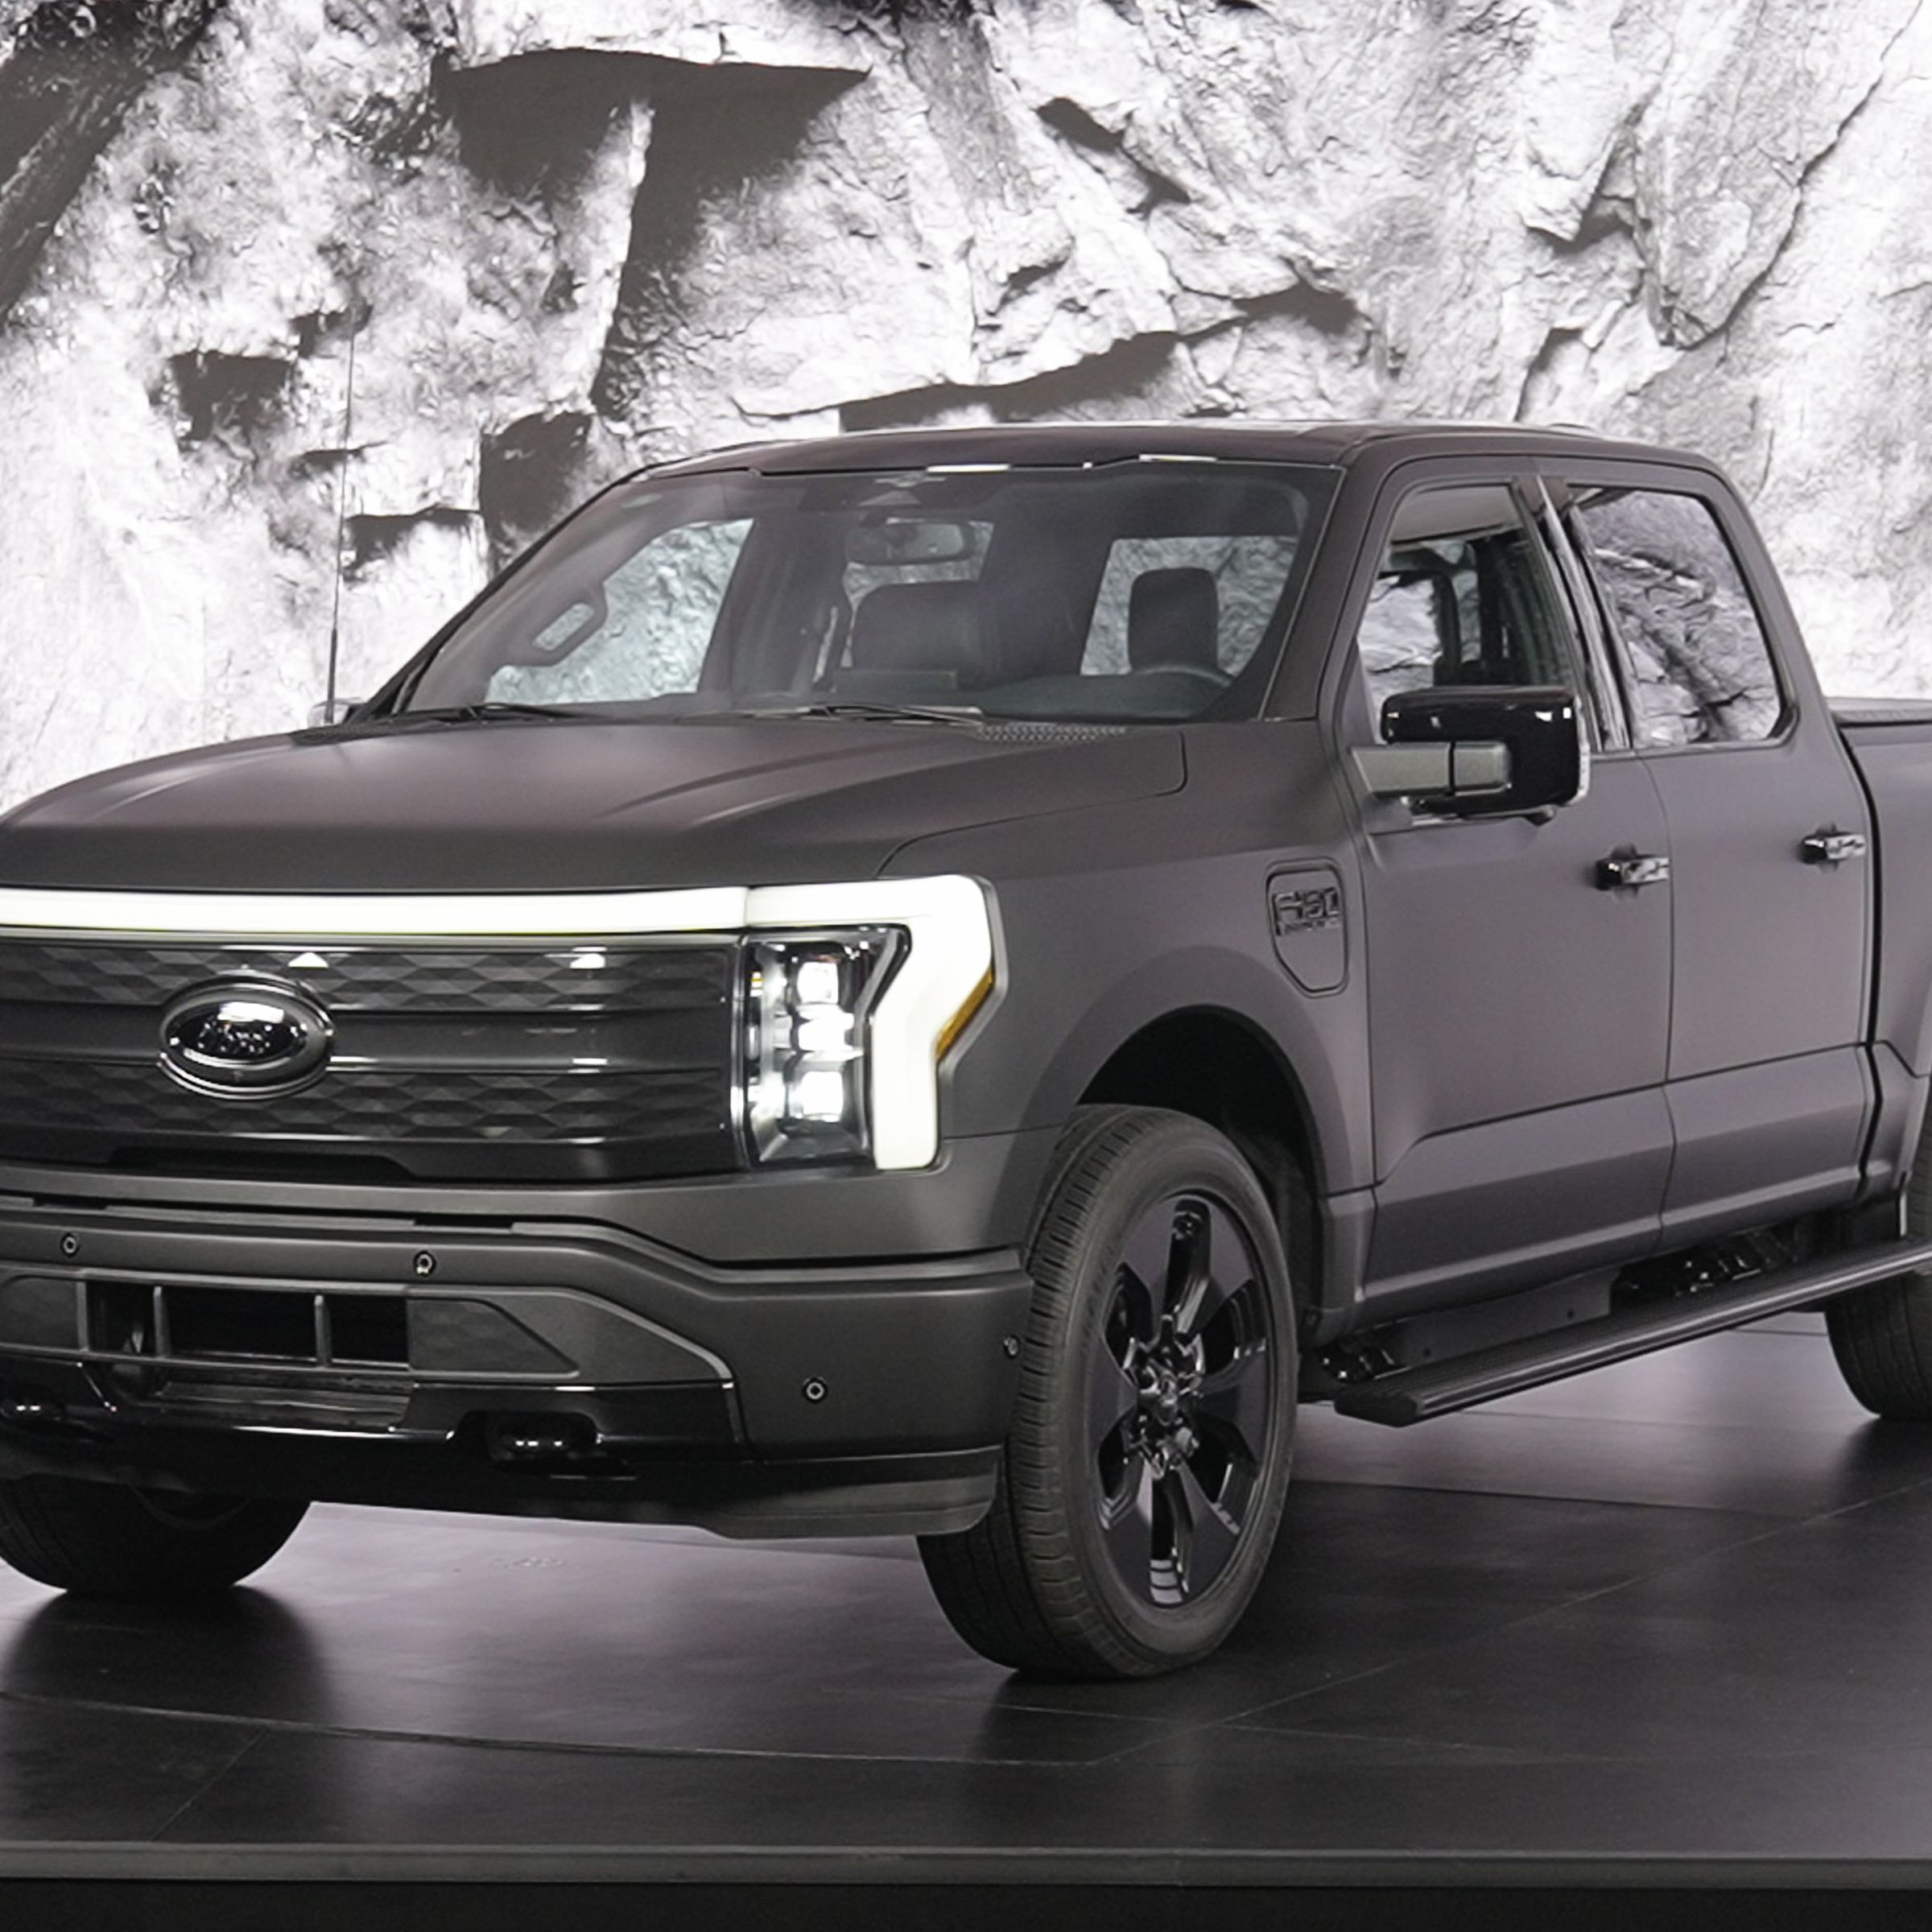 F-150 Lightning truck on a rotating stage with lighted backdrop